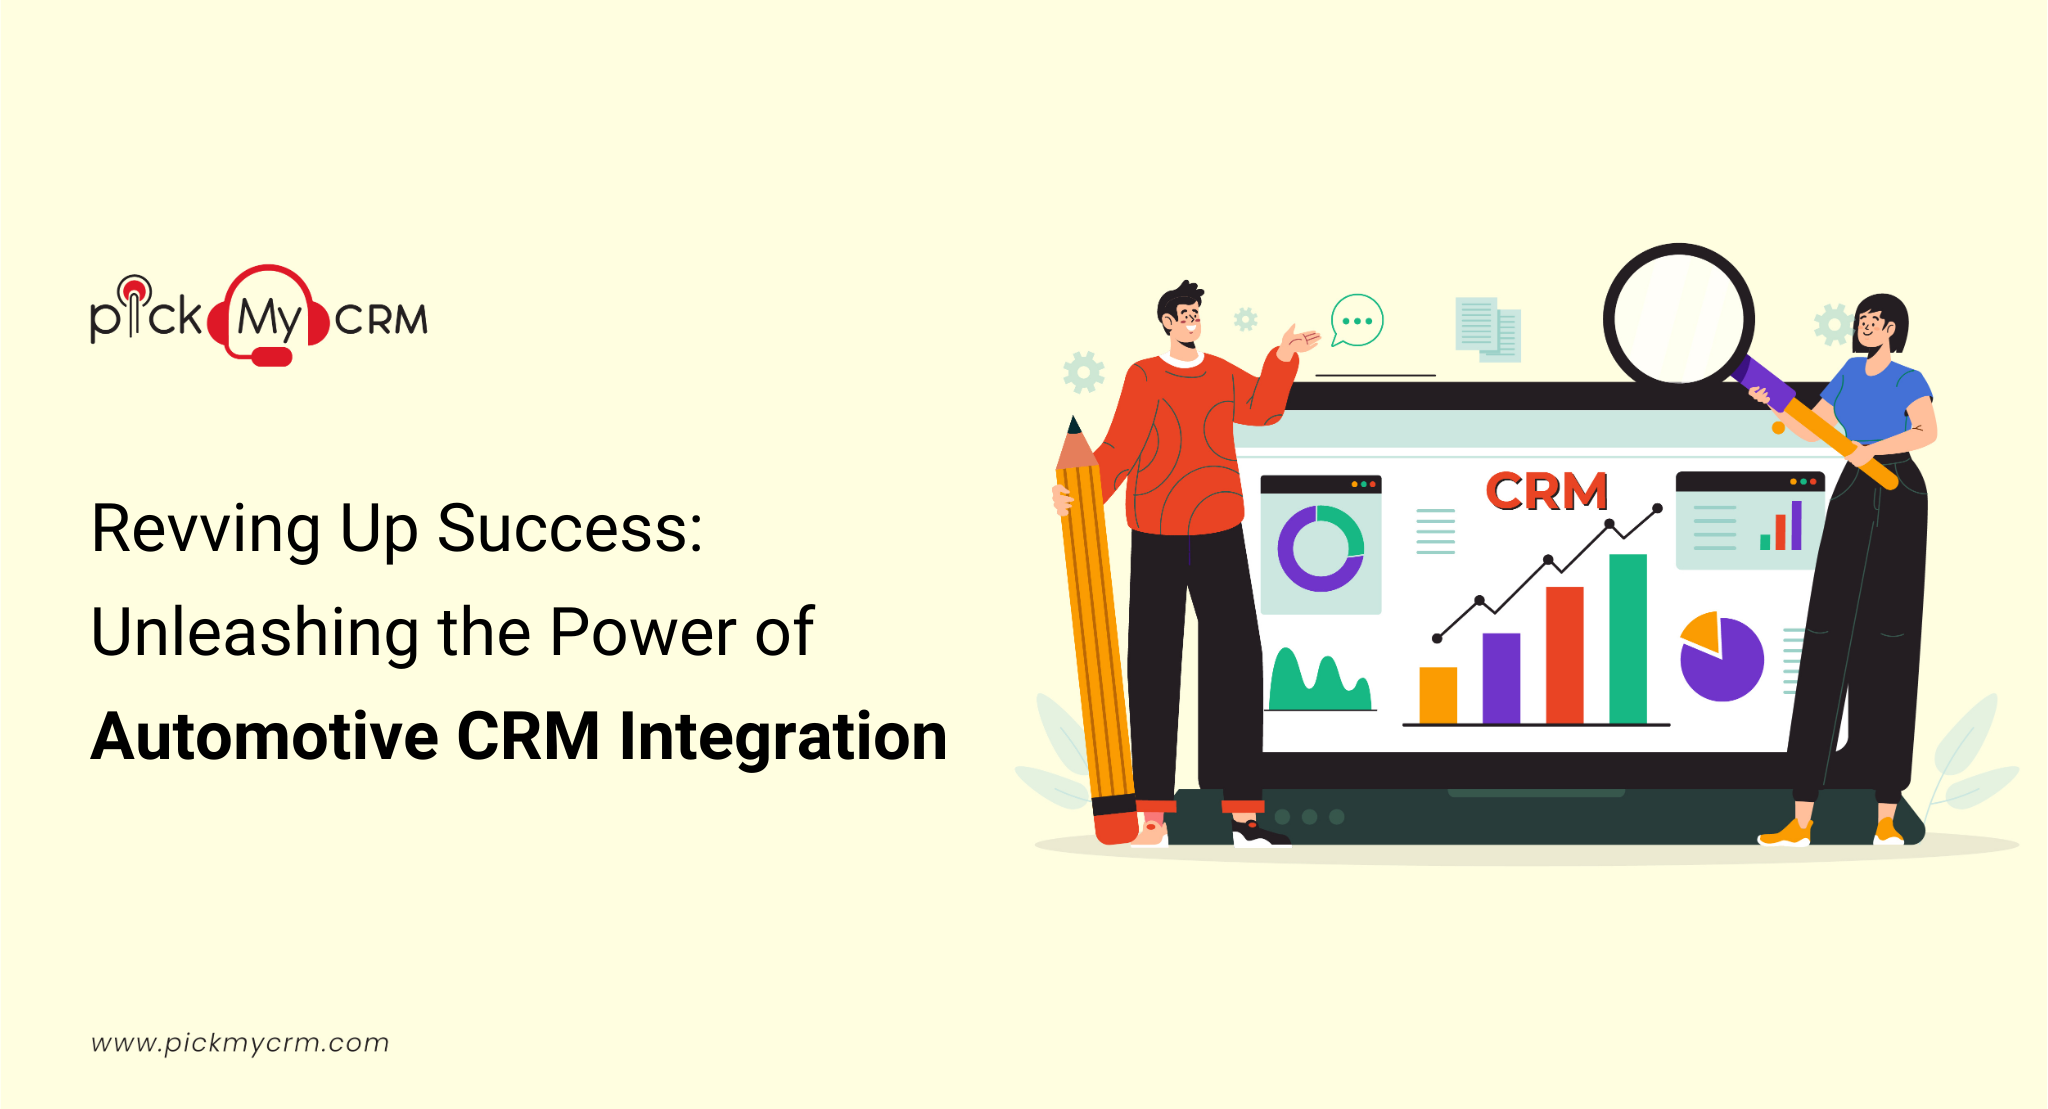 Revving Up Success: Unleashing the Power of Automotive CRM Integration